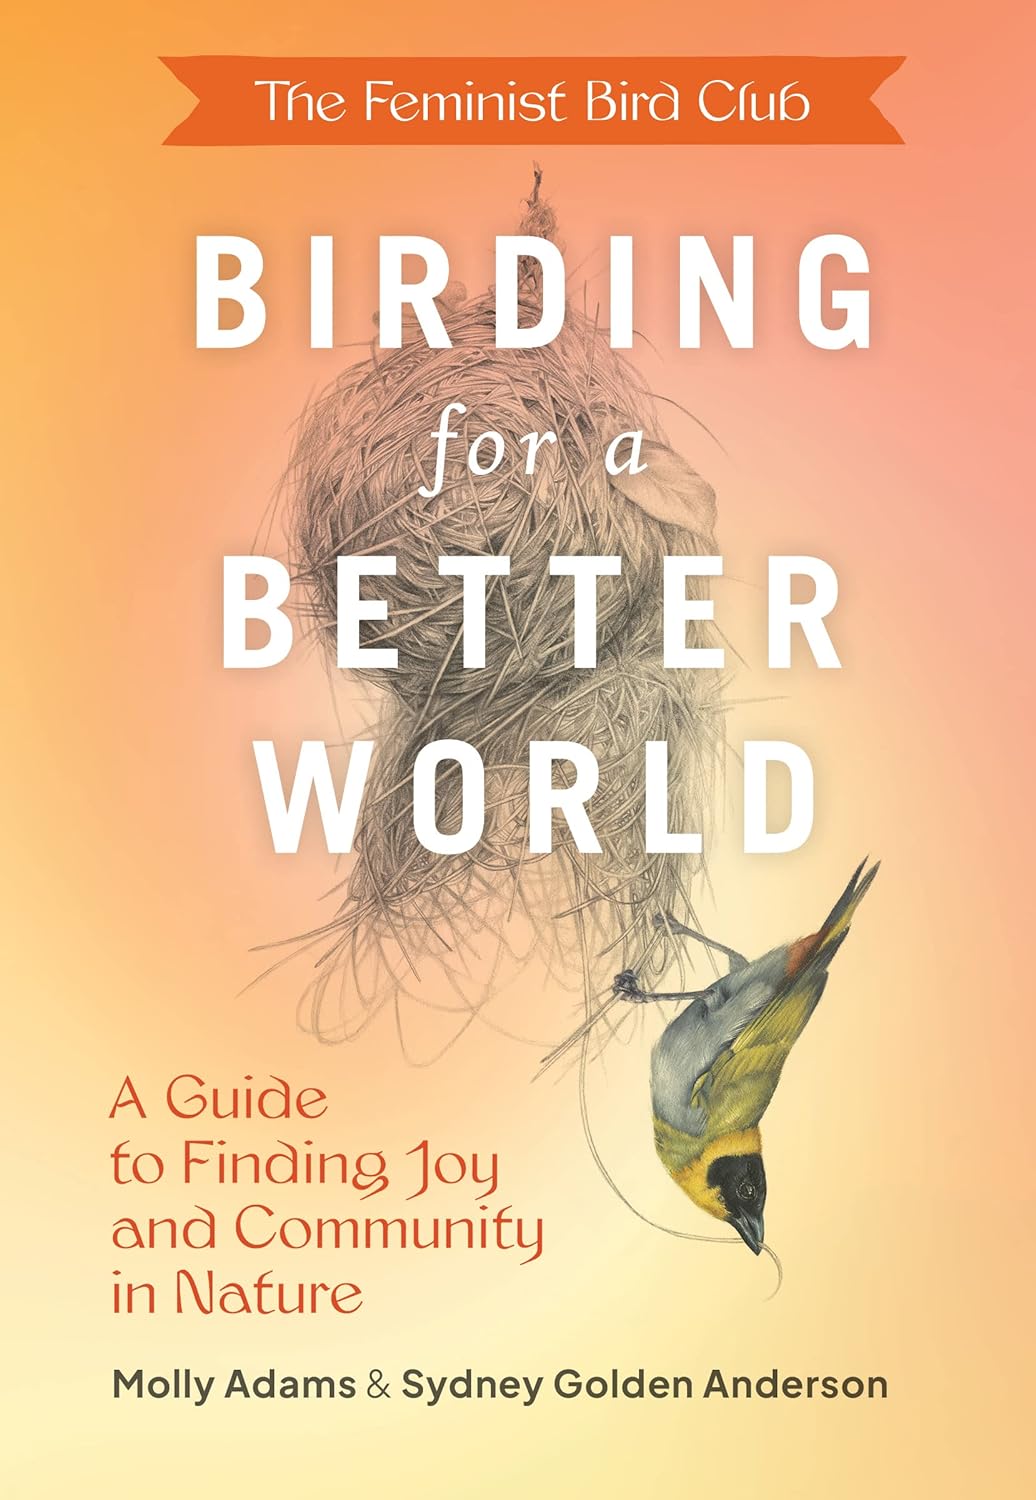 A book cover depicting a yellow bird hanging from a tangled round nest.